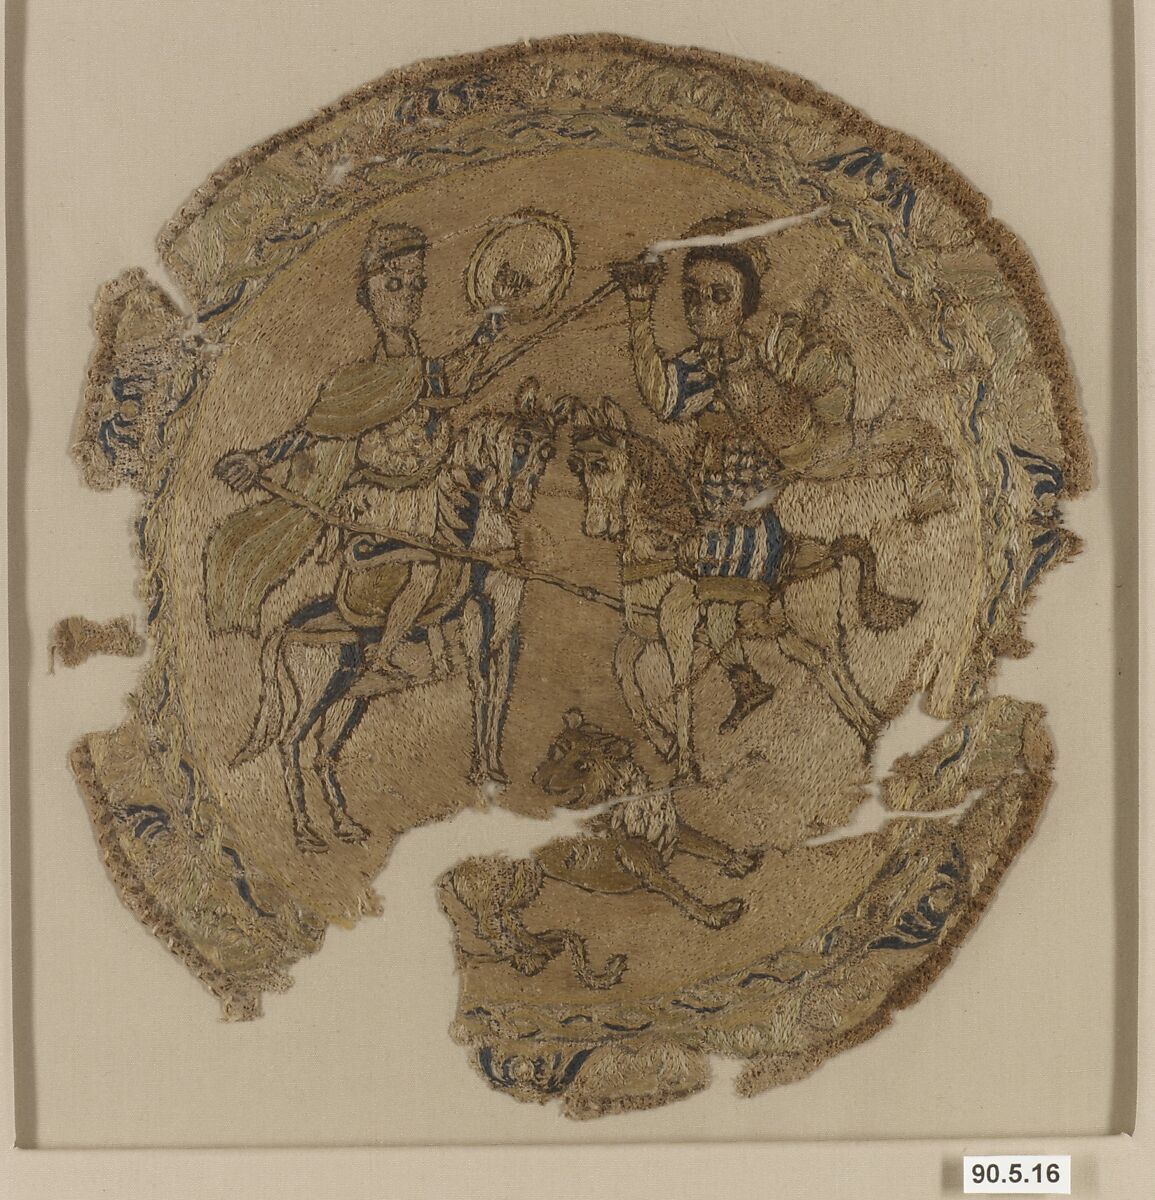 Roundel with Mounted Warriors and a Lion